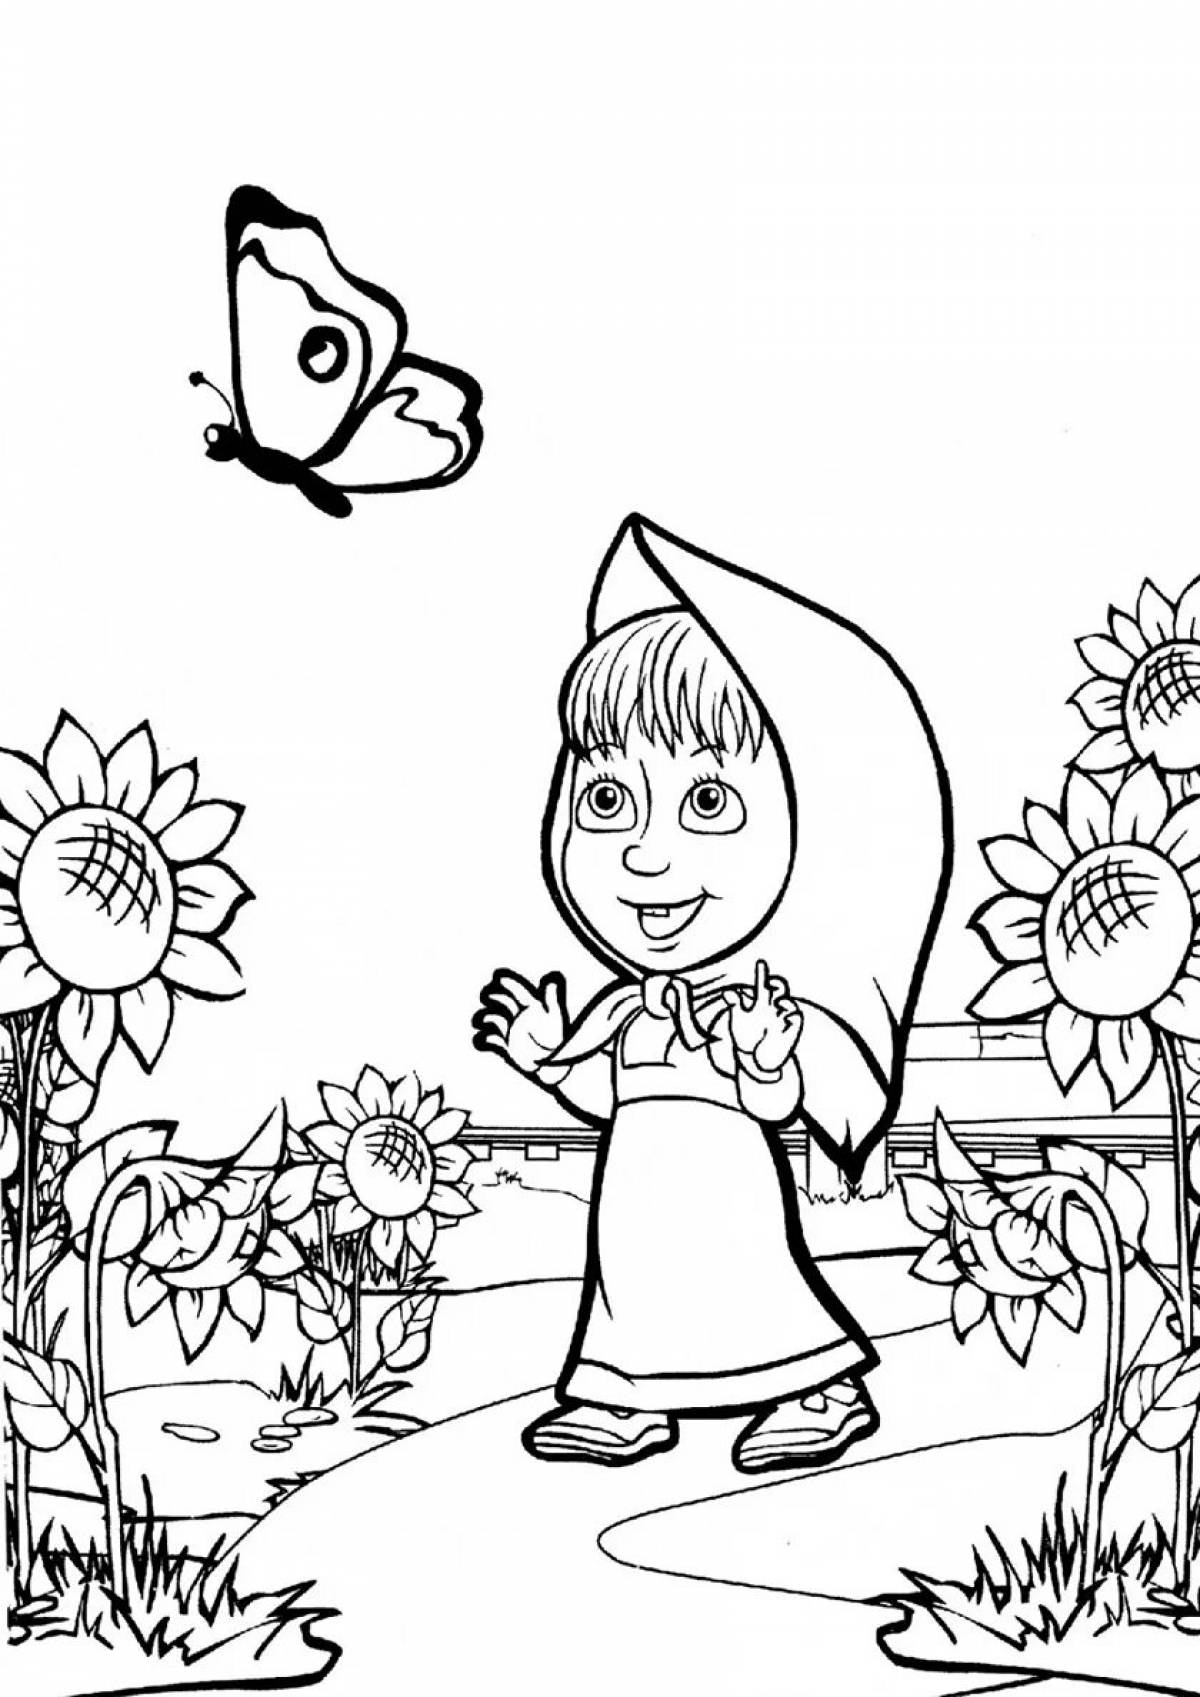 Colorful masha and the bear coloring book